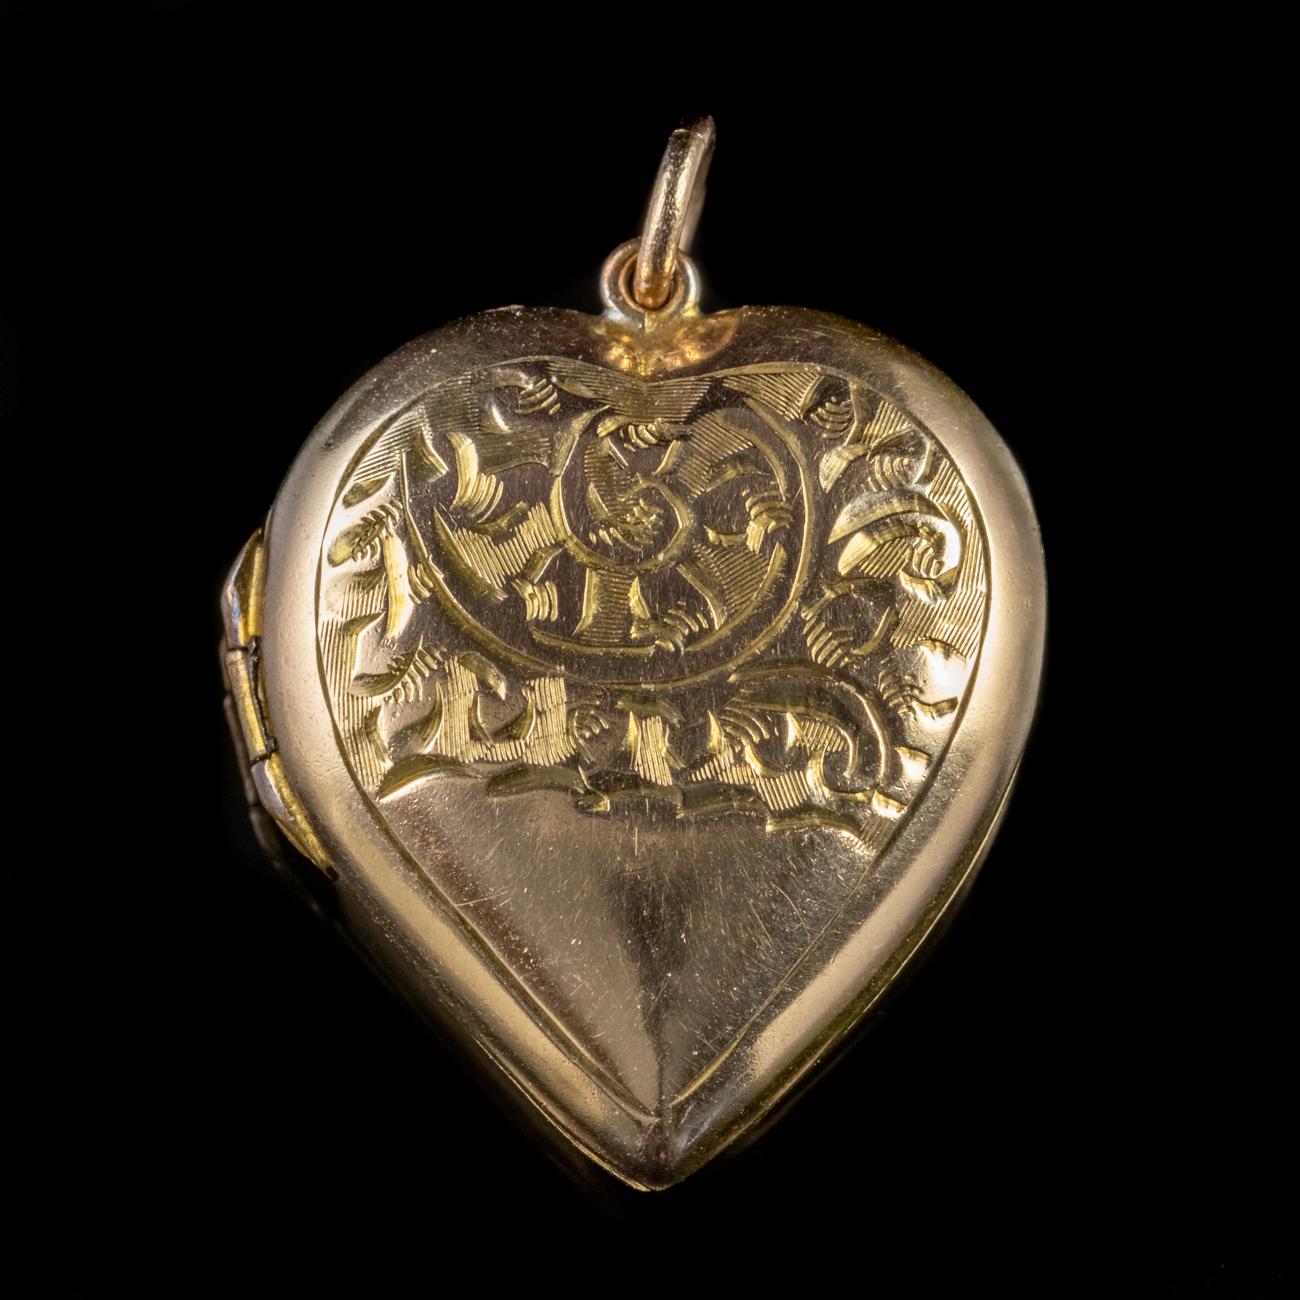 This beautiful Antique Victorian heart shaped locket has been modelled with a 9ct Yellow Gold front and back. It features incredibly detailed engraving on the front in a foliate design.

Hearts were a popular motif in the Victorian era and of course